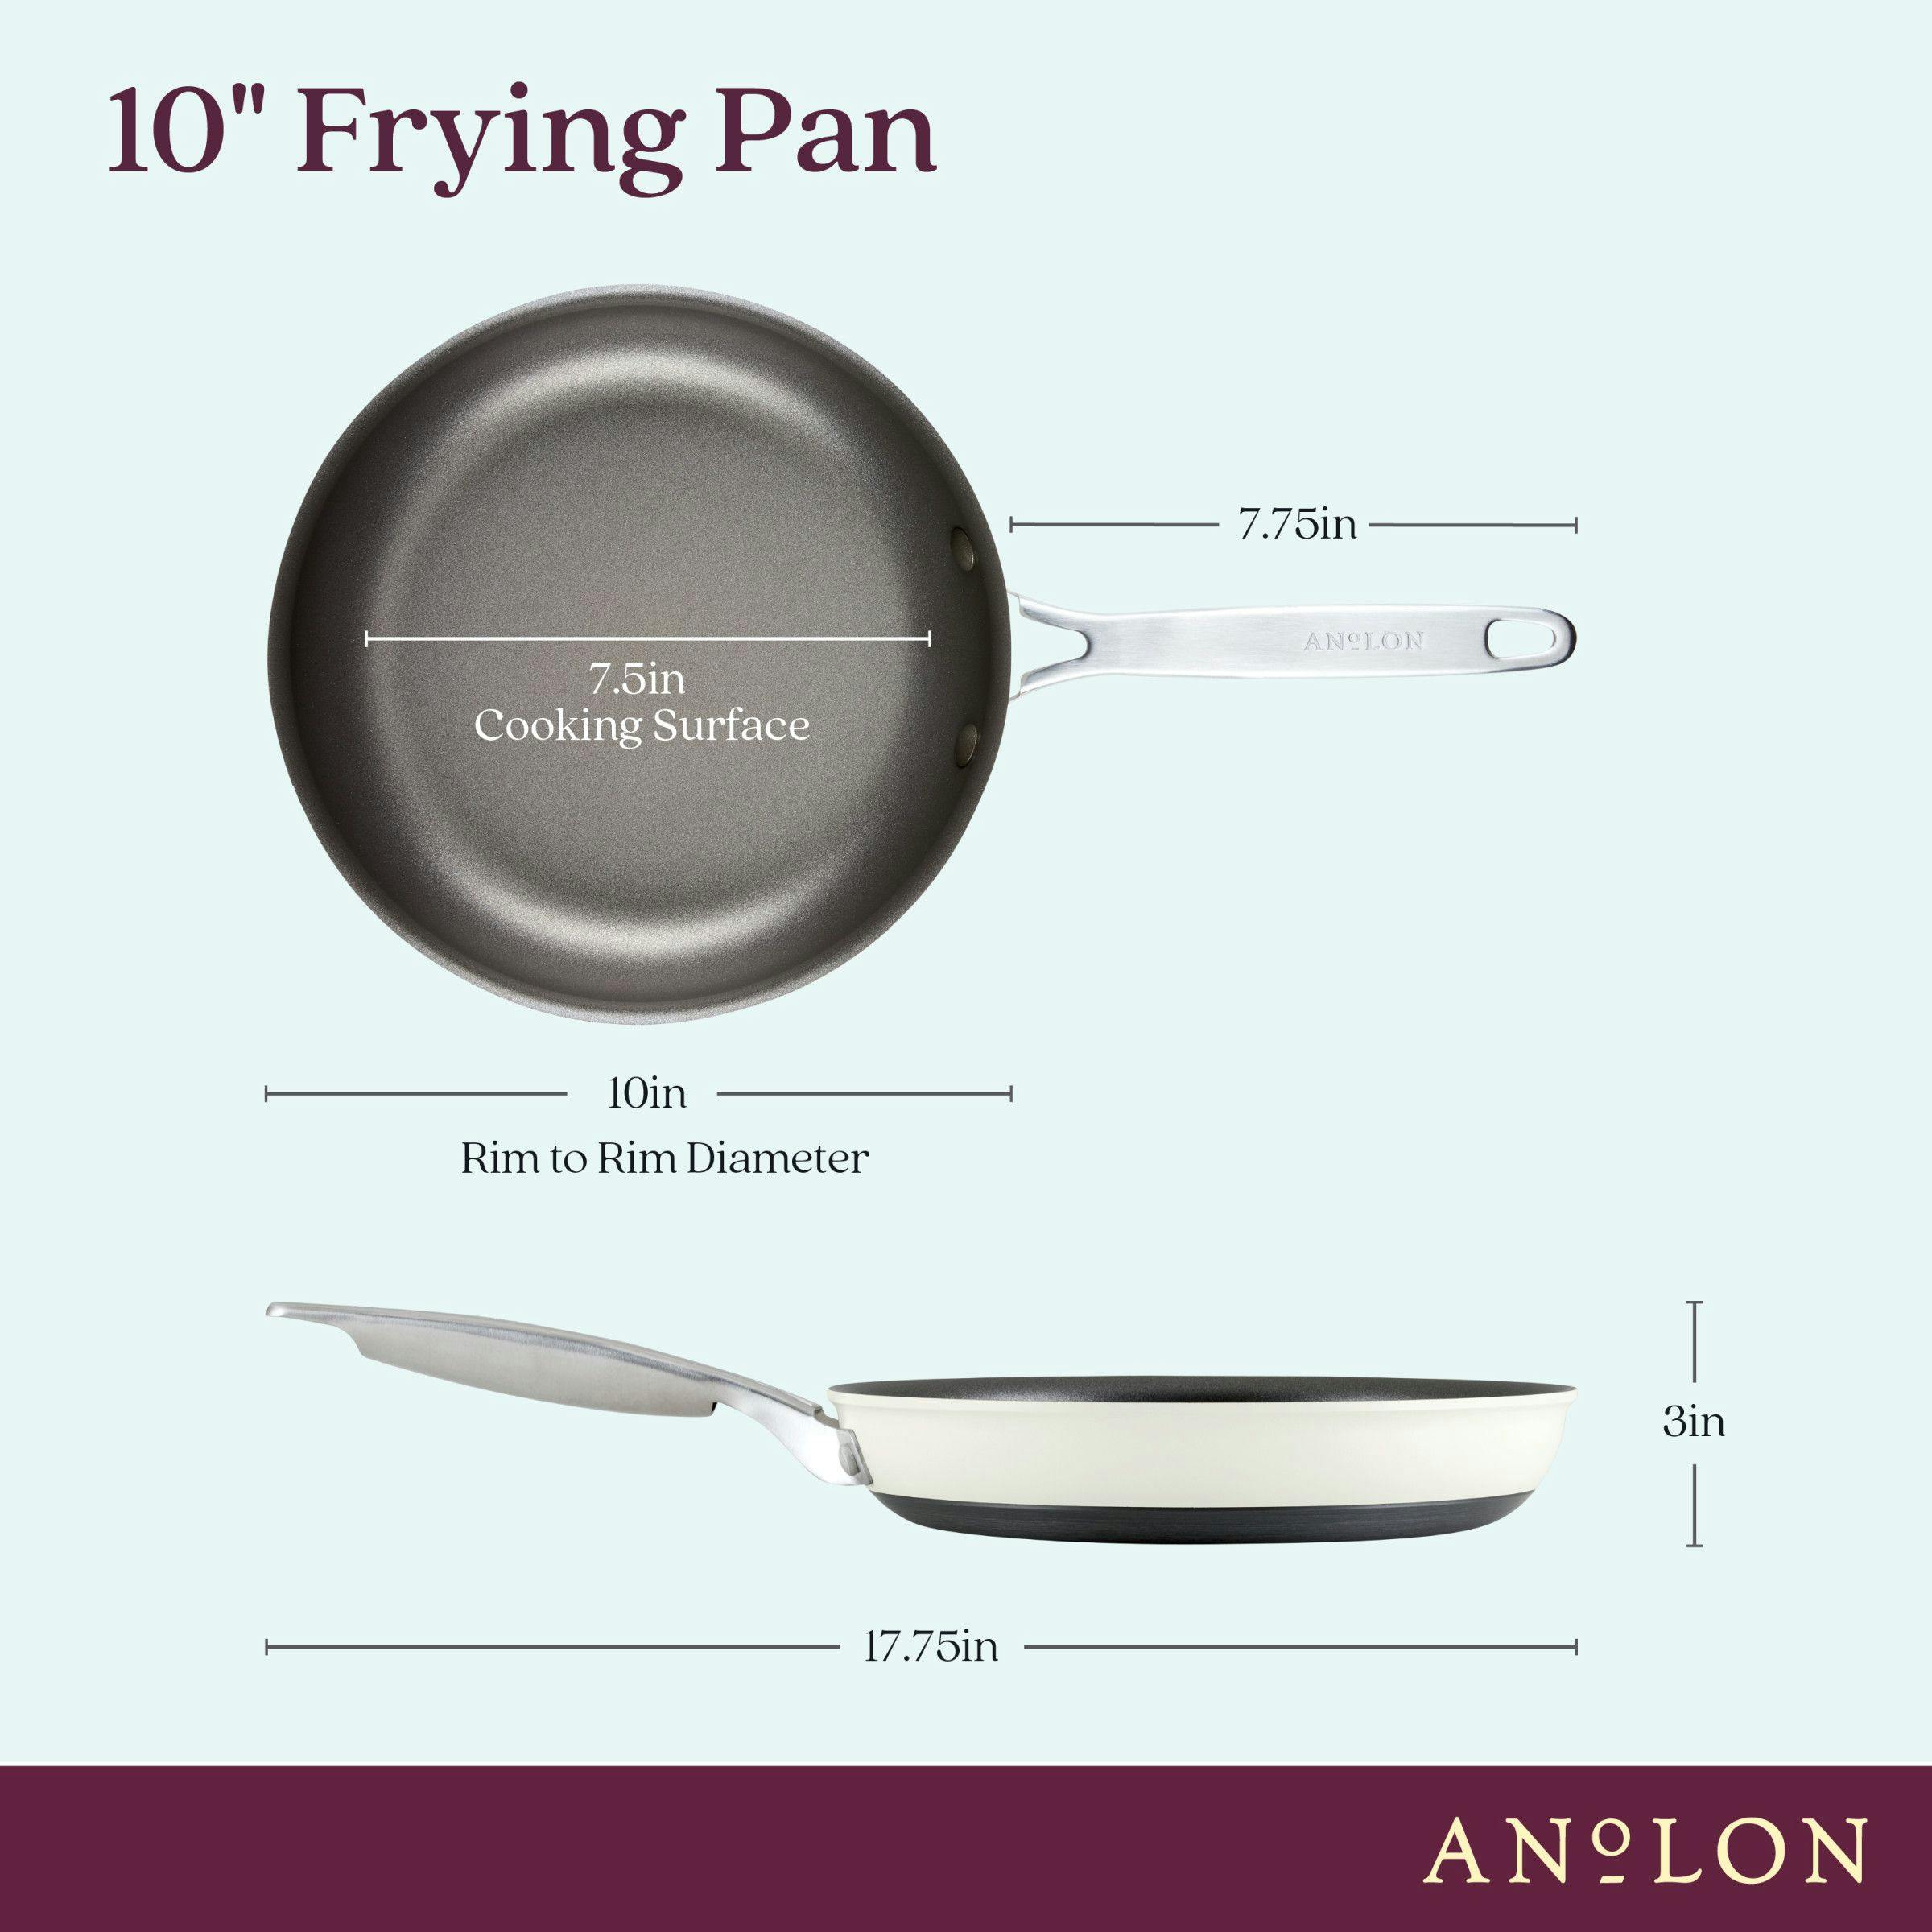 Anolon Achieve Hard Anodized Nonstick Frying Pan, 12-Inch, Cream